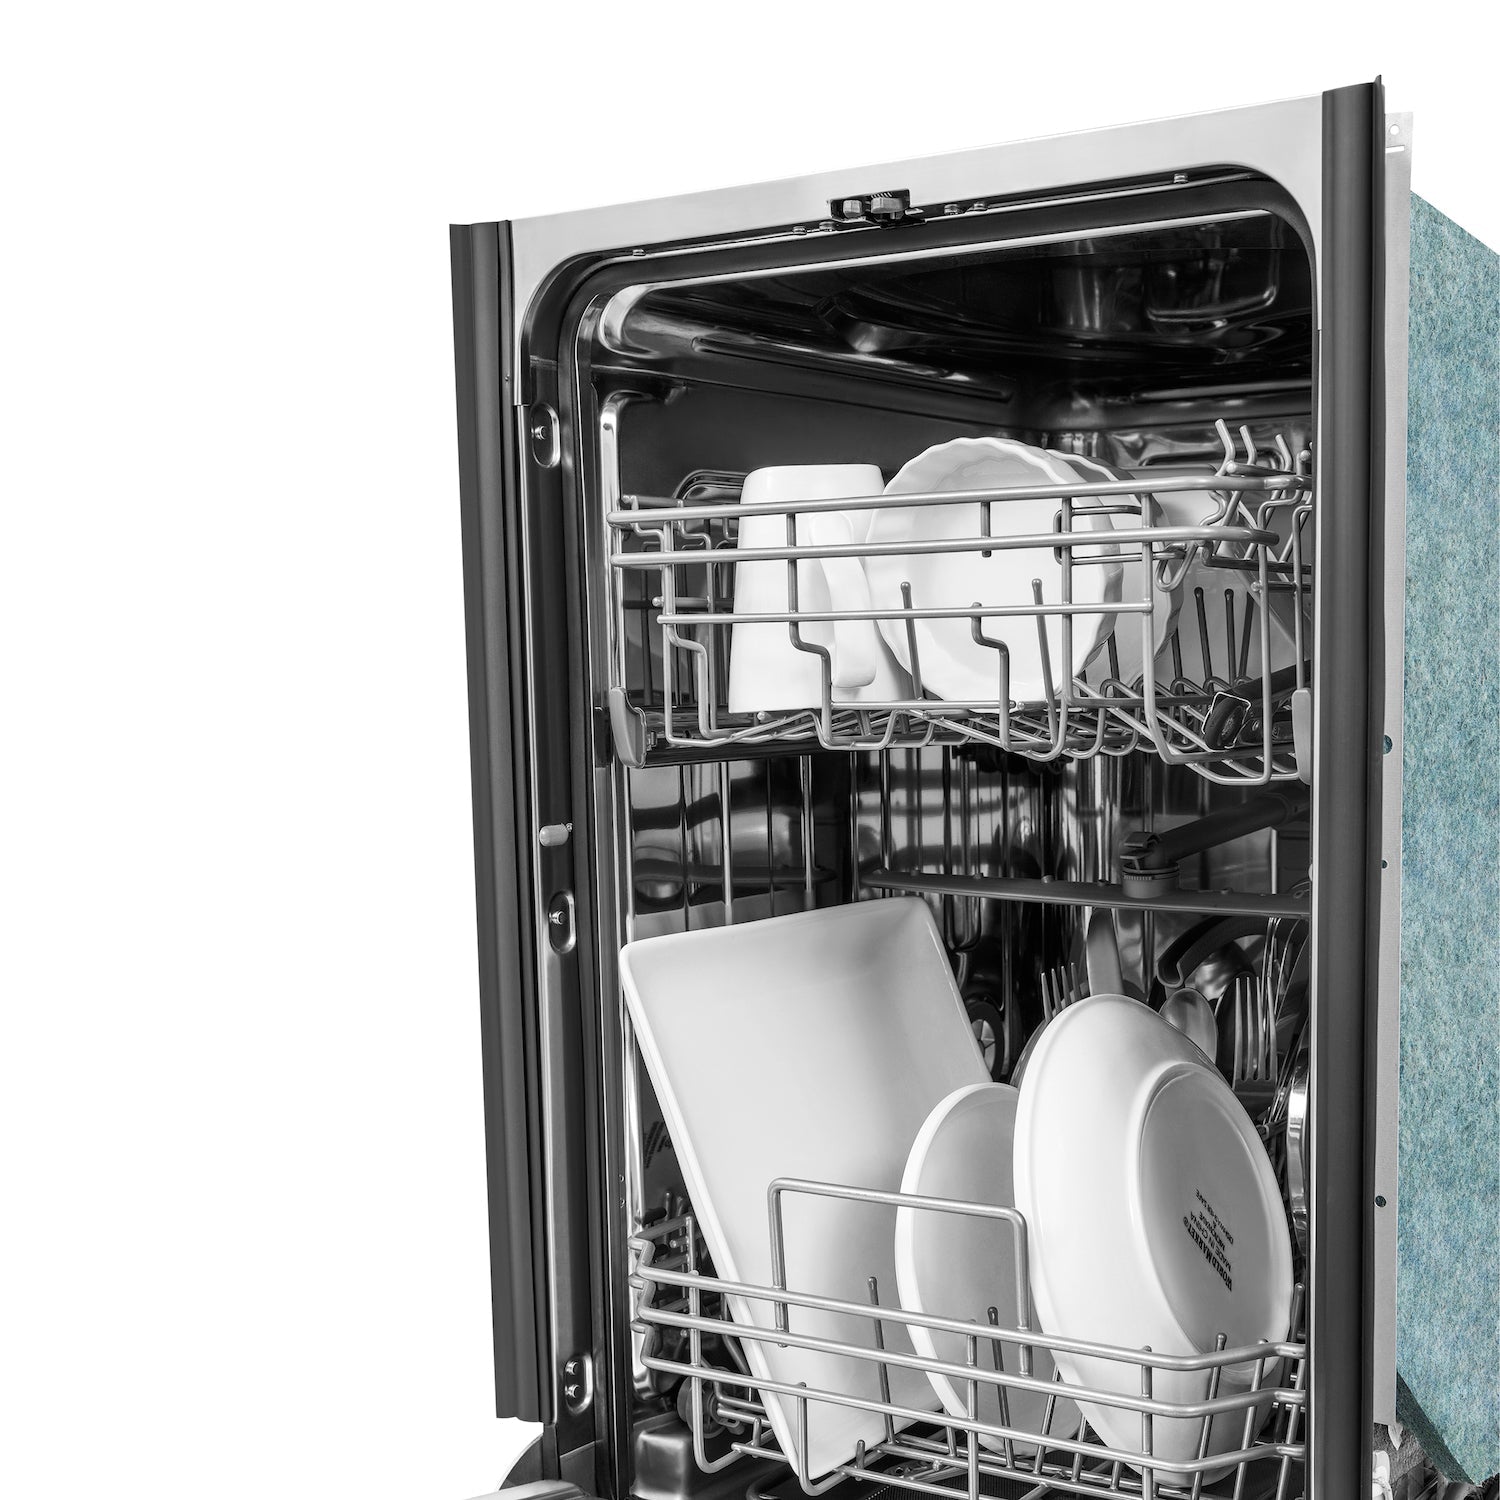 ZLINE 18 in. Compact Fingerprint Resistant Top Control Built-In Dishwasher with Stainless Steel Tub and Traditional Style Handle, 52dBa